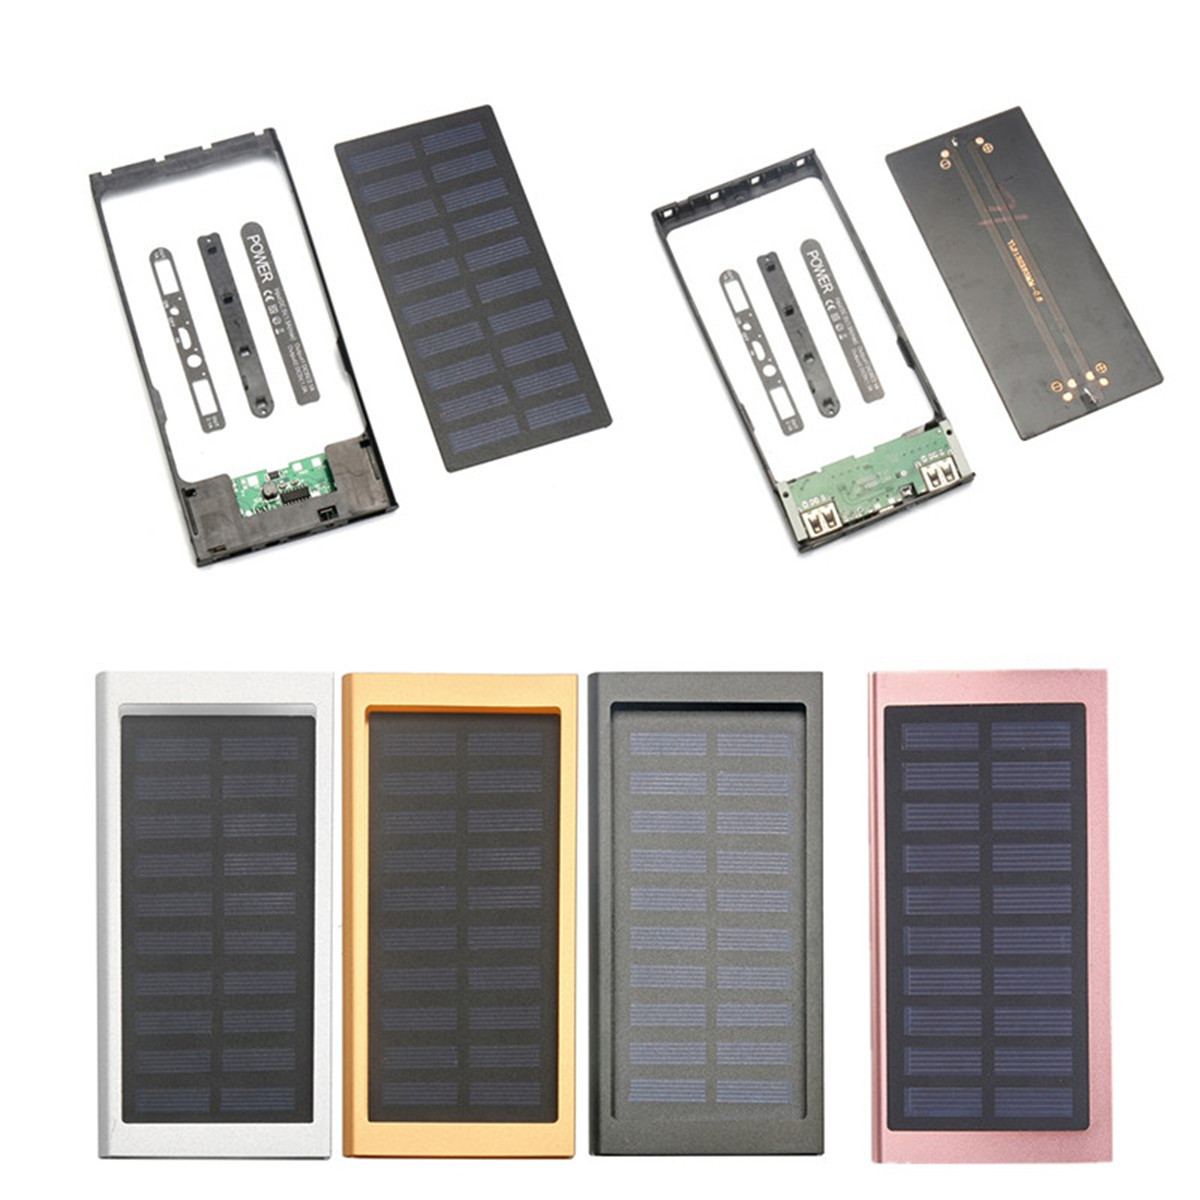 

10000mAh Portable Solar Power Bank Dual USB Fast Charger DIY Case For Mobile Phone